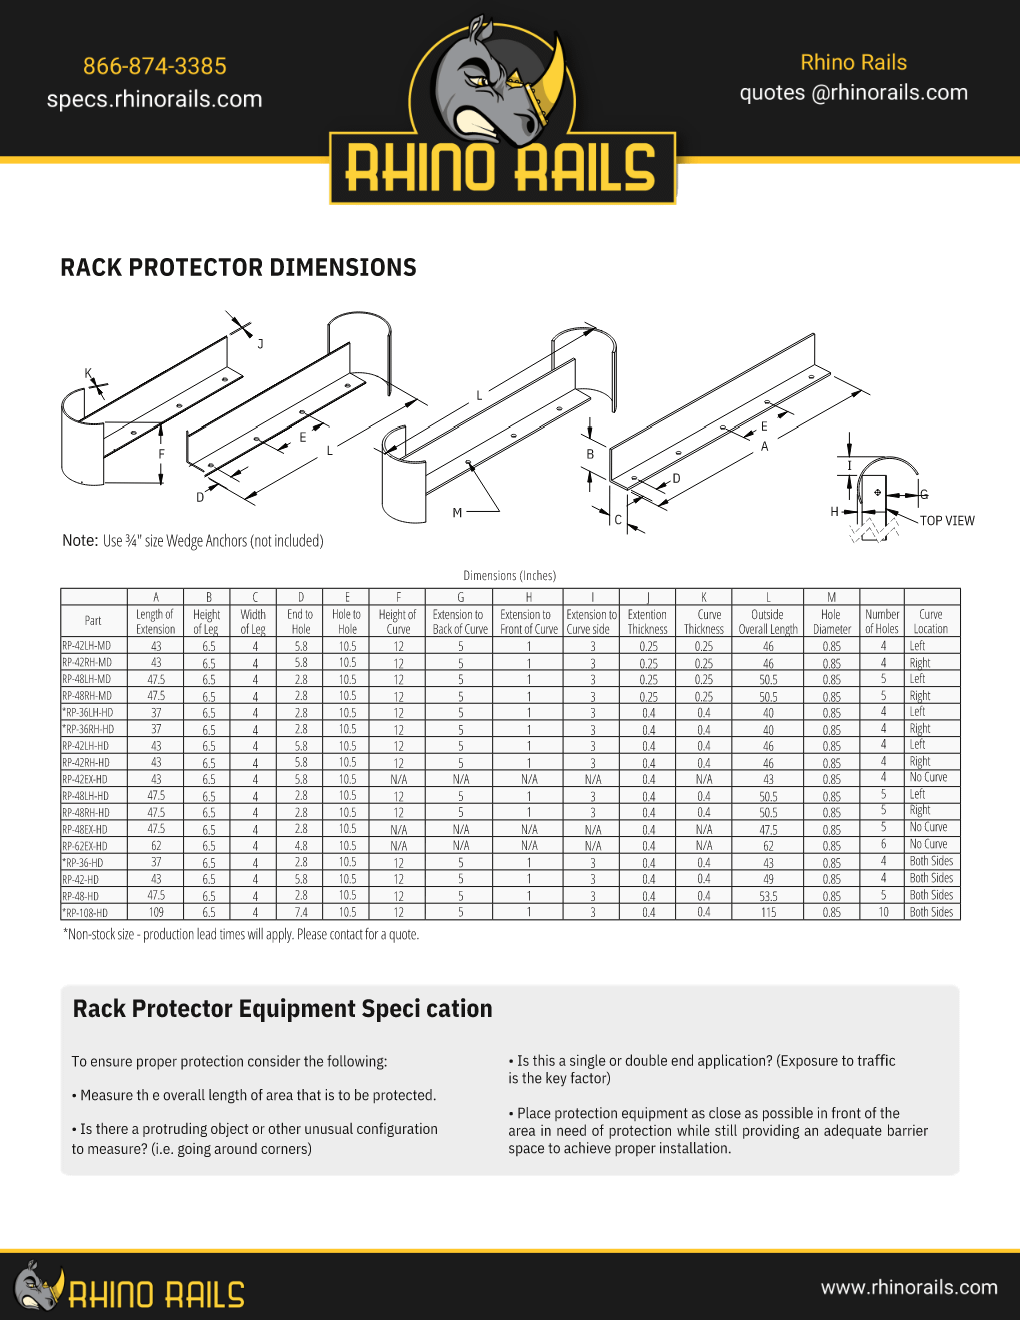 Universal Rack Protector - Product Information Sheet - Photo 2